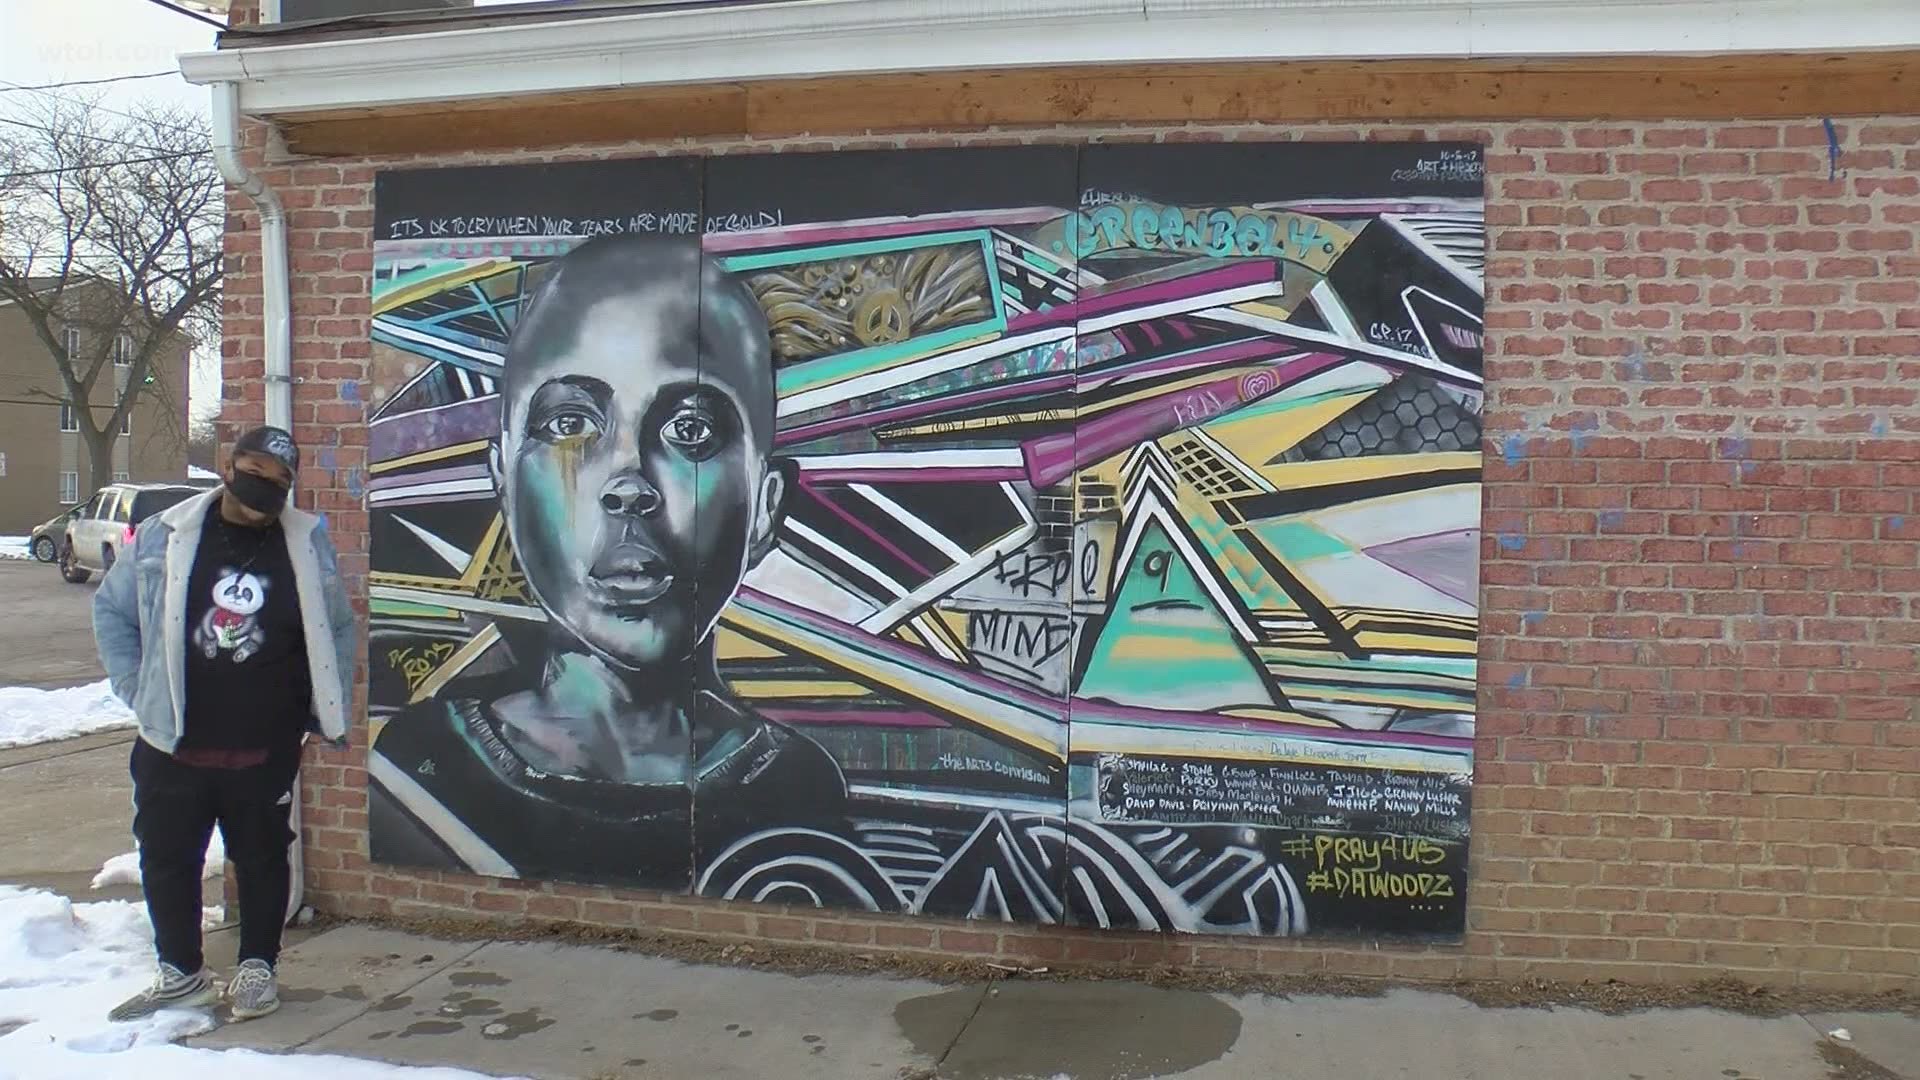 David Ross works with the Arts Commission, but is also known for painting or helping to coordinate some of the most memorable murals across Toledo.